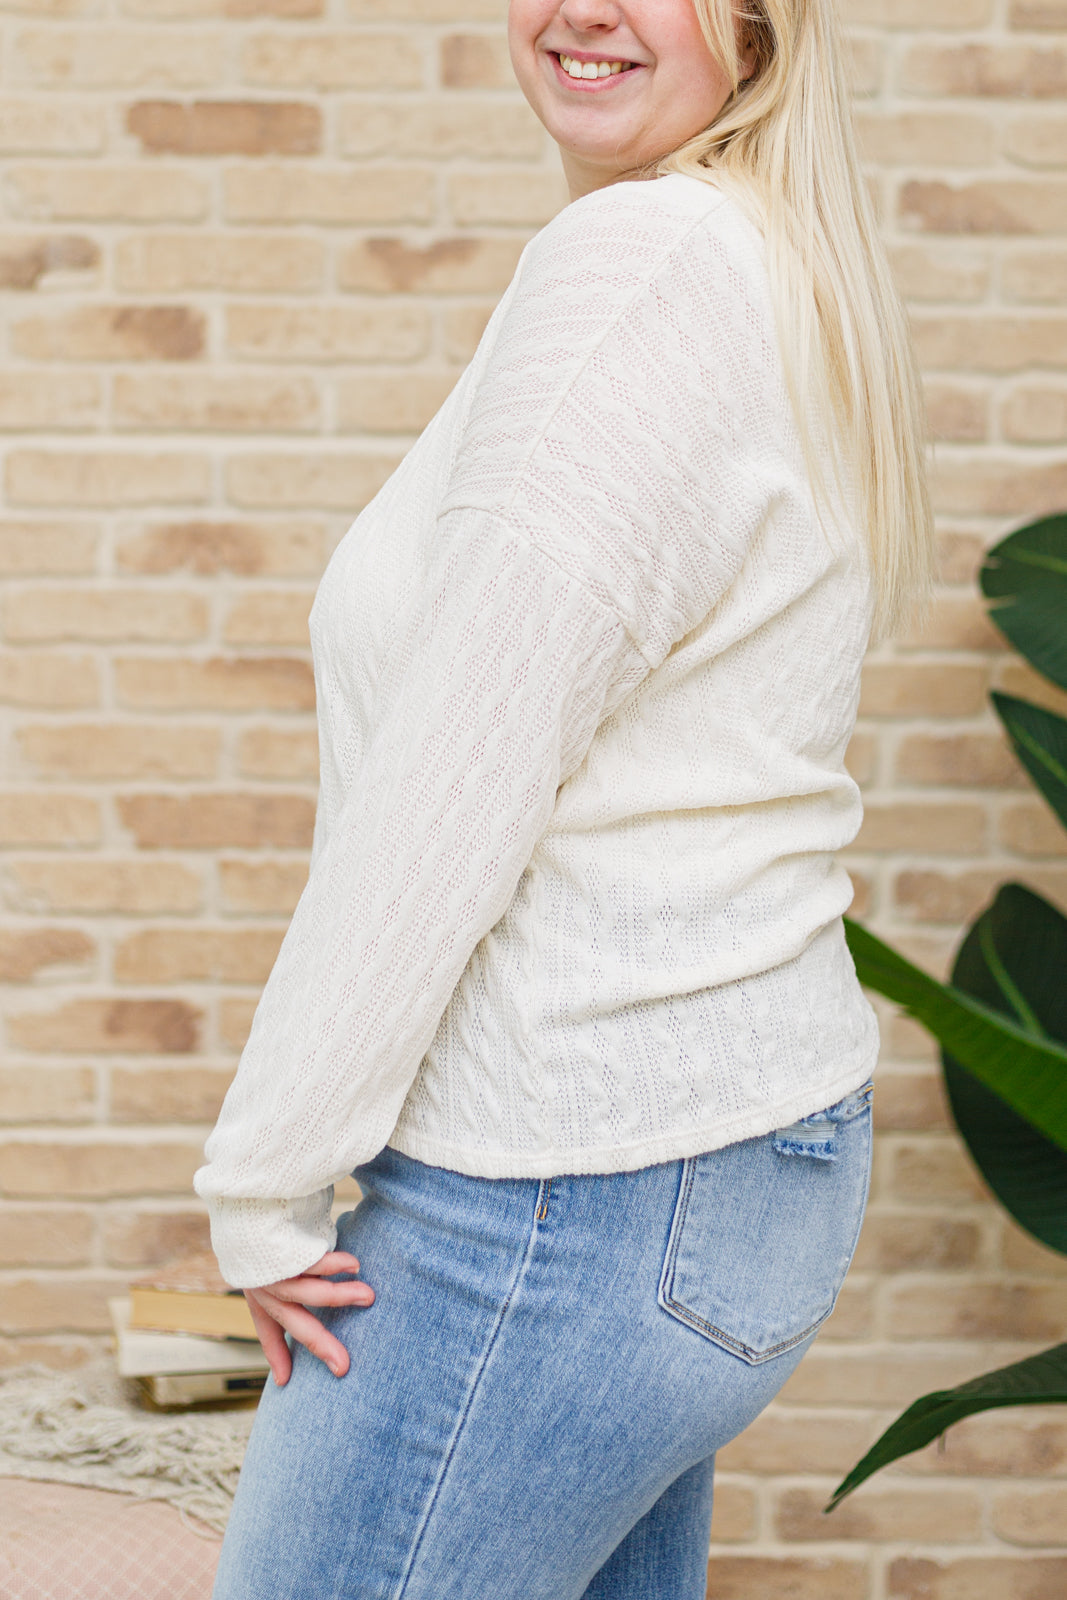 Keep Me Here Knit Sweater in Cream - FamFancy Boutique